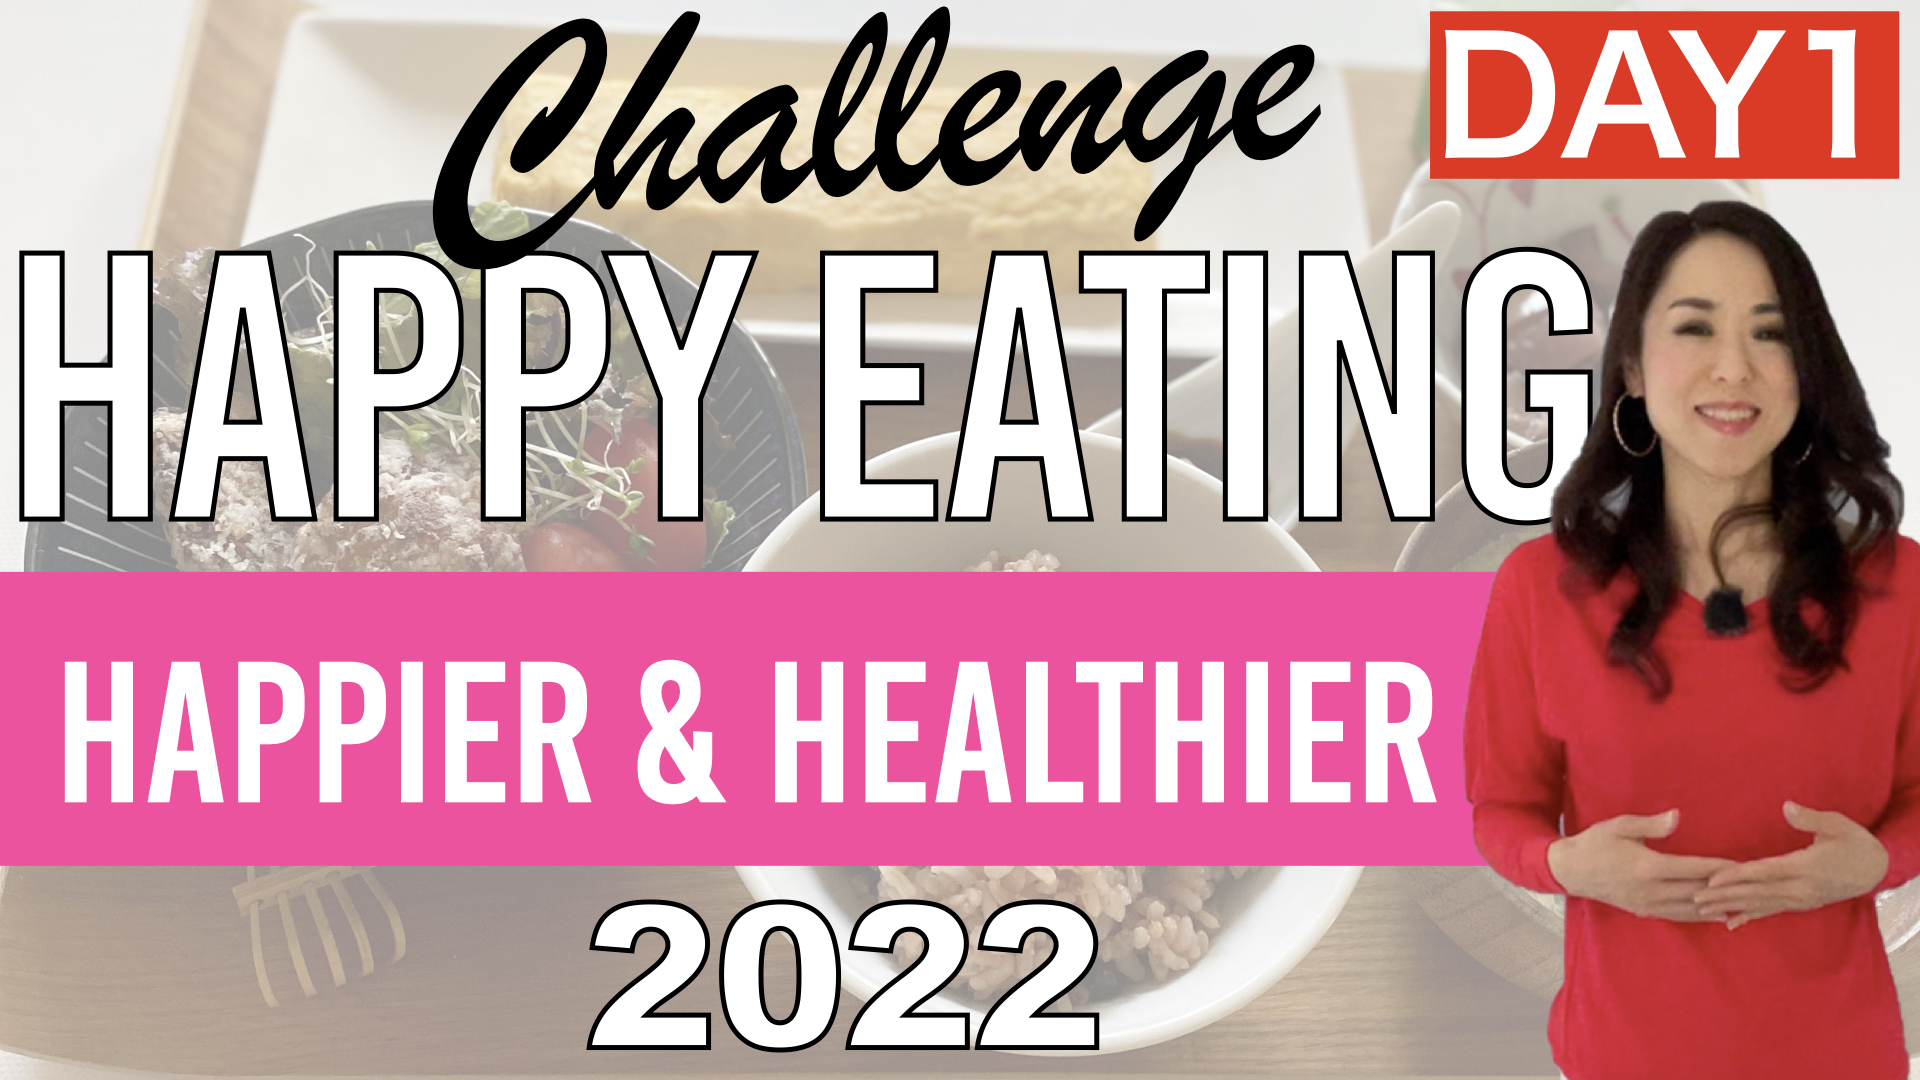 Happy Eating Challenge Day 1